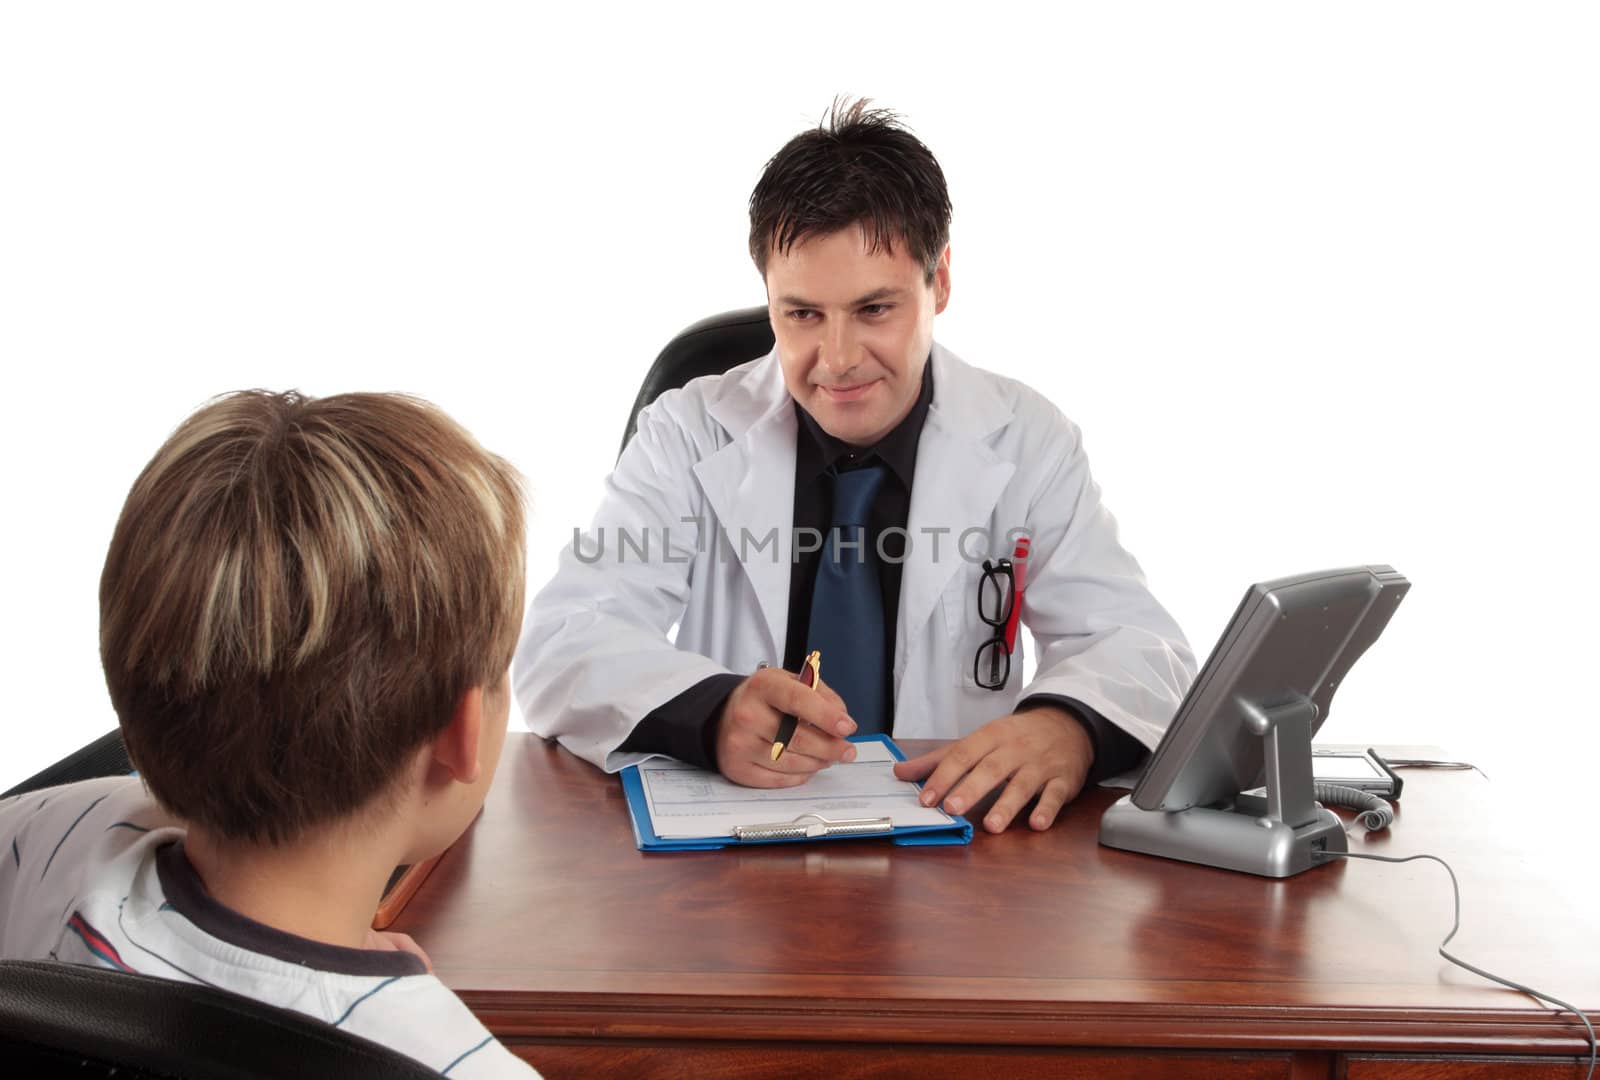 A caring paediatrician doctor in consultation with a child patient.